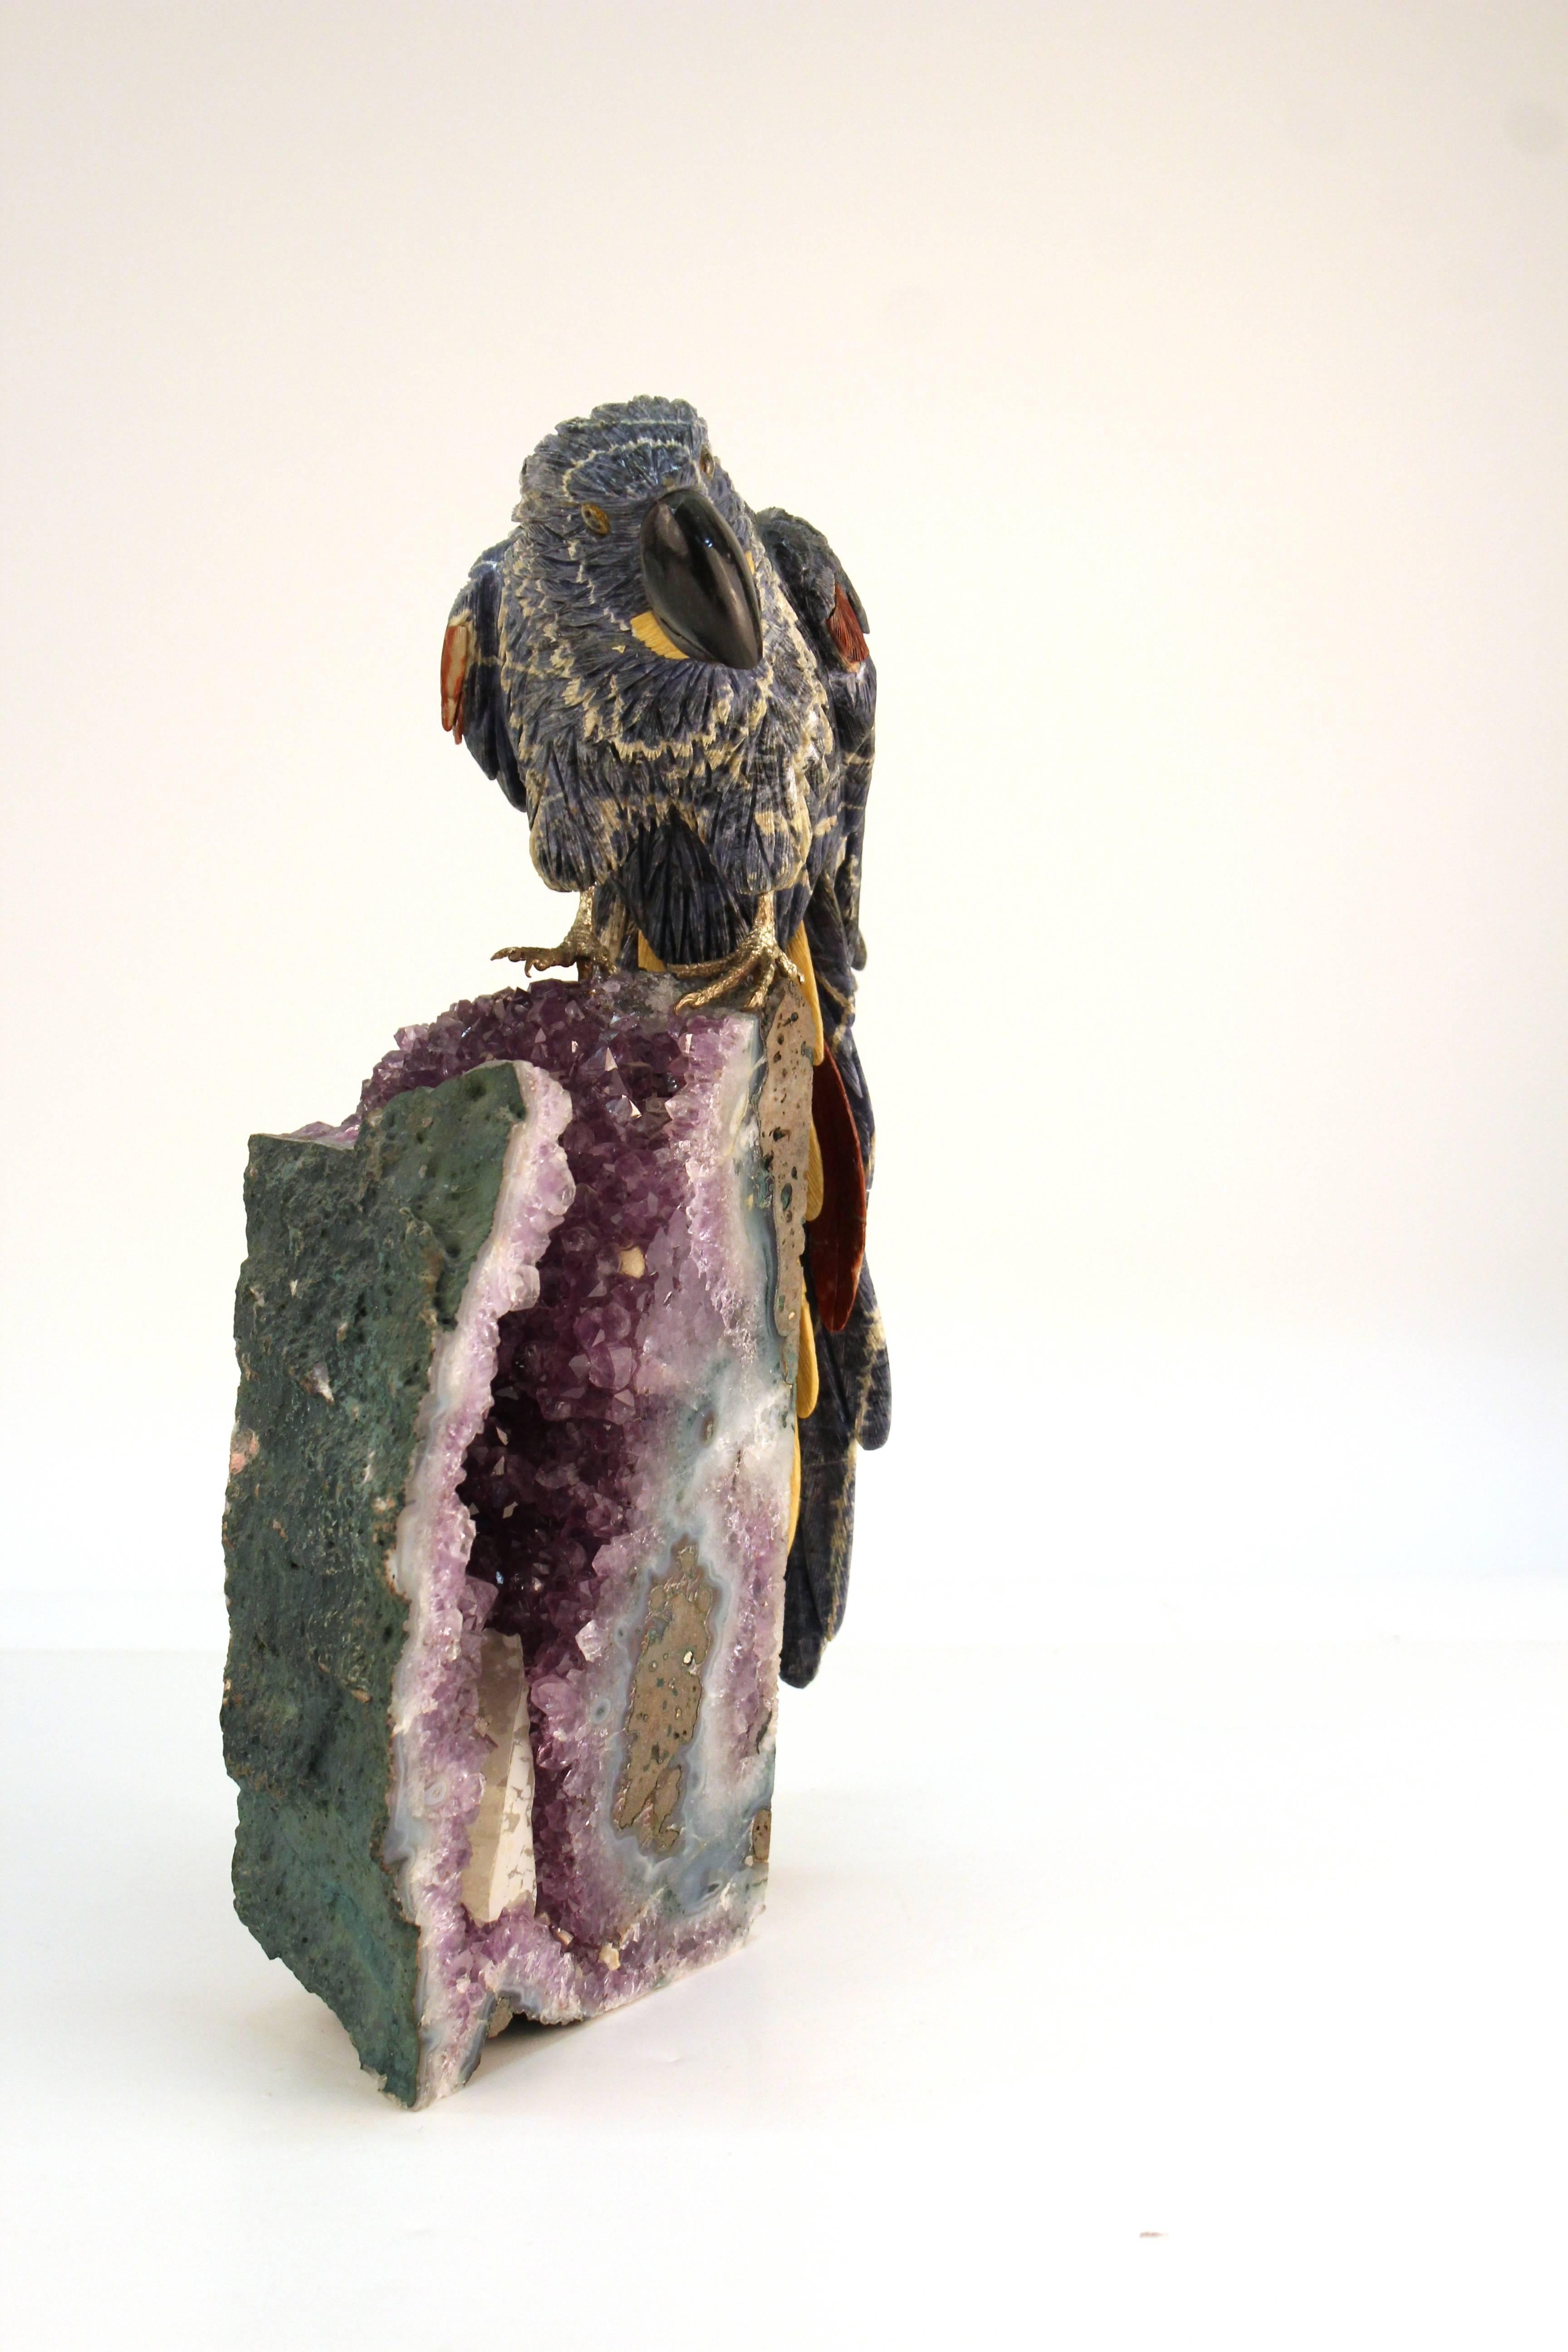 A sculpture with a large parrot crafted in different colored marbles and stones. The bird is mounted on a large piece of sliced amethyst crystal. Some small cracks and missing bits on the tip of the bird's feathers. In good condition appropriate to